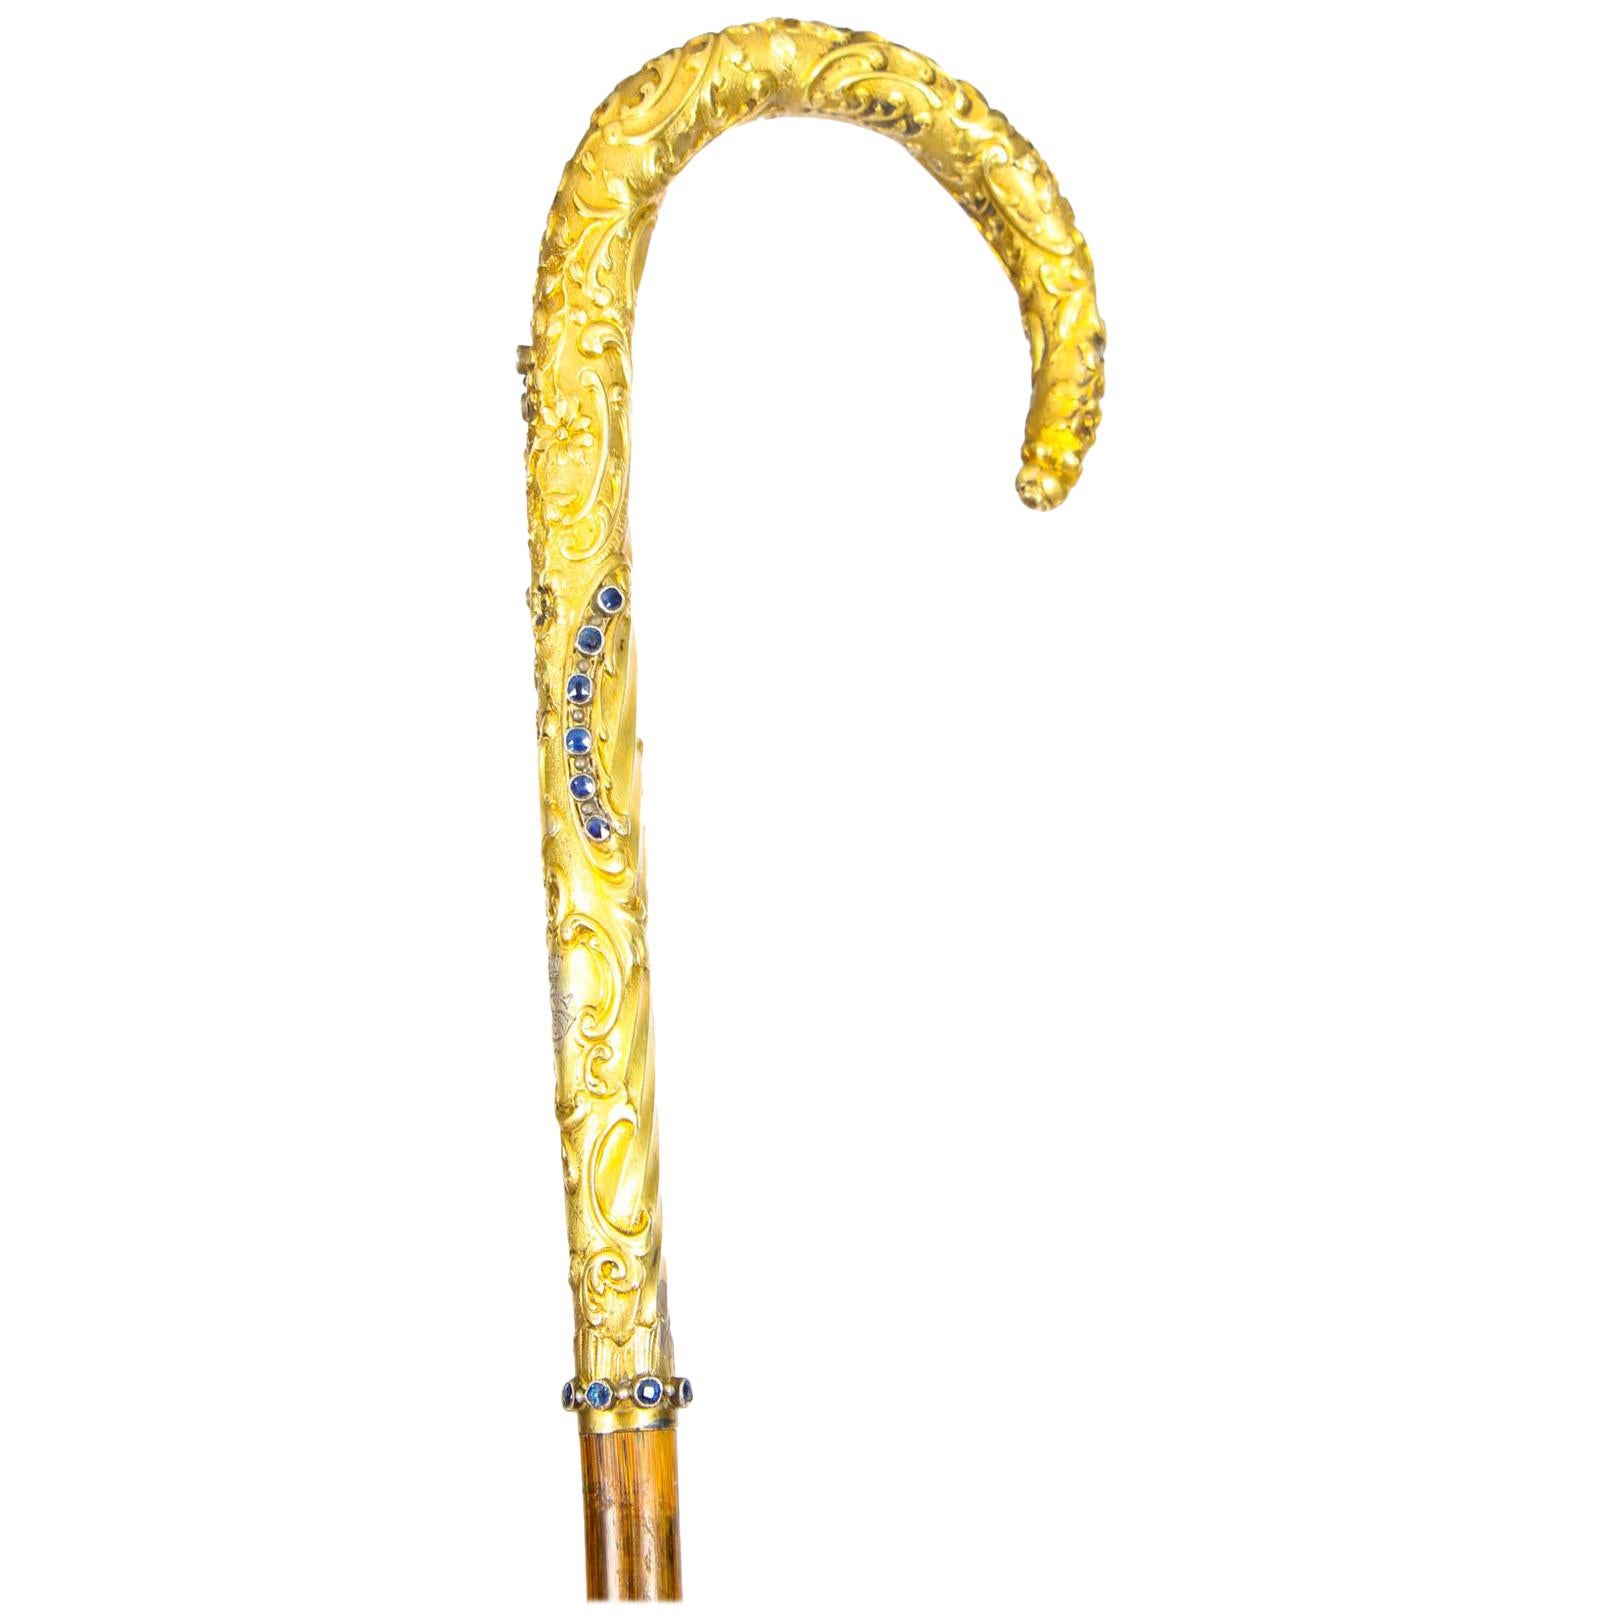 Antique Austro Hungarian Gold-Plated Sapphires Walking Stick Cane, 19th Century